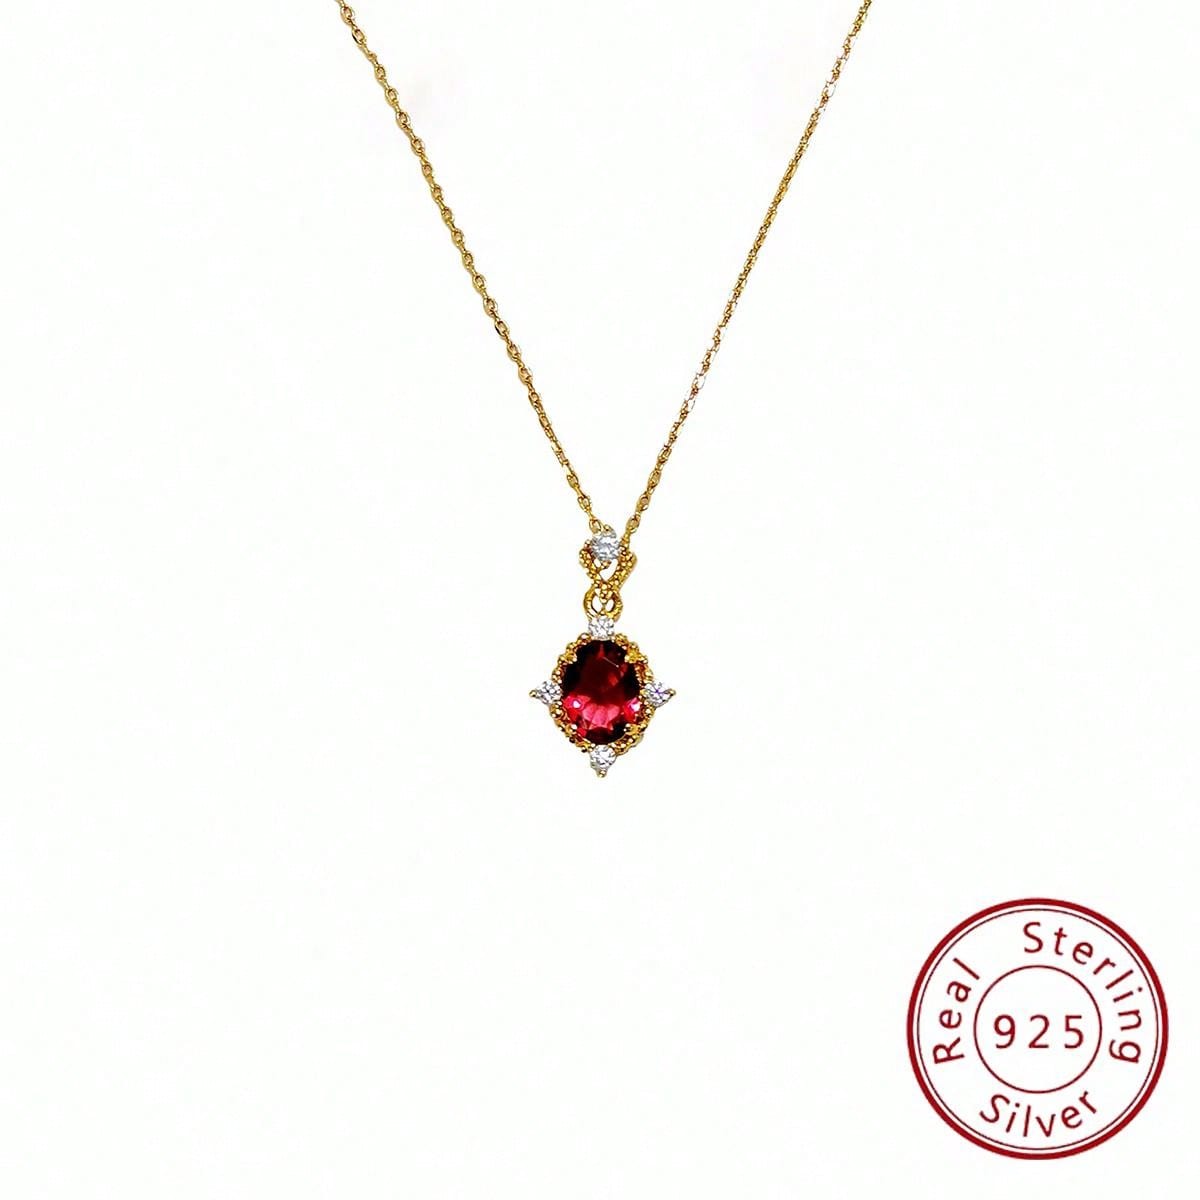 An Elegant Red Pomegranate Lovely Silver Pendant Necklace